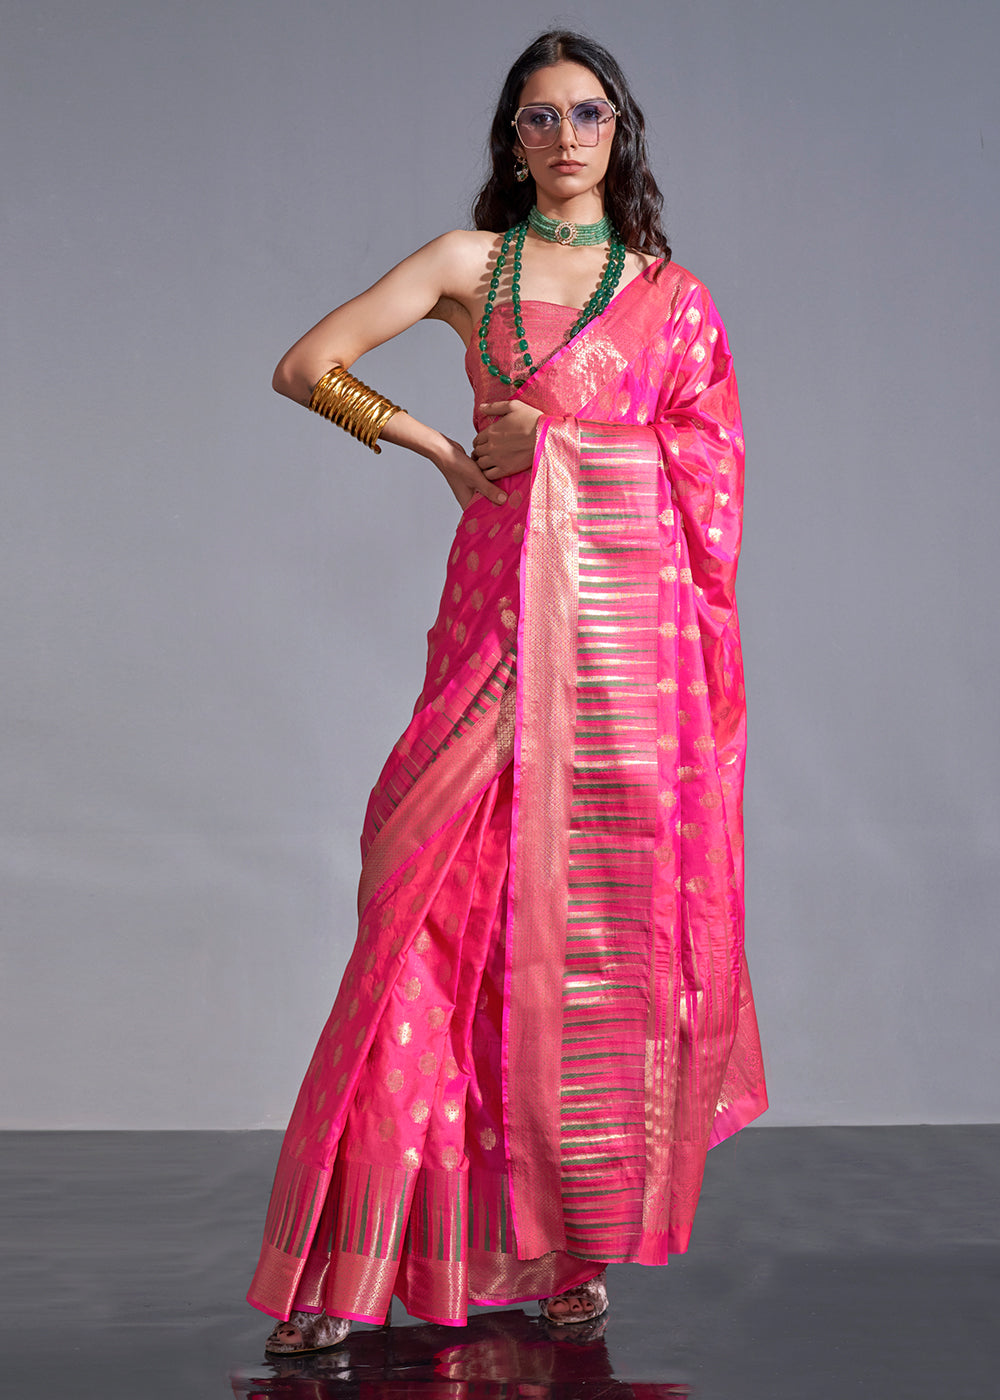 SAI DECORATIVE Women's Indian Traditional Plain Weave Satin Silk Saree  soft, silky and shiny,With Unstitched Blouse Piece Color:-Magenta -  Walmart.com